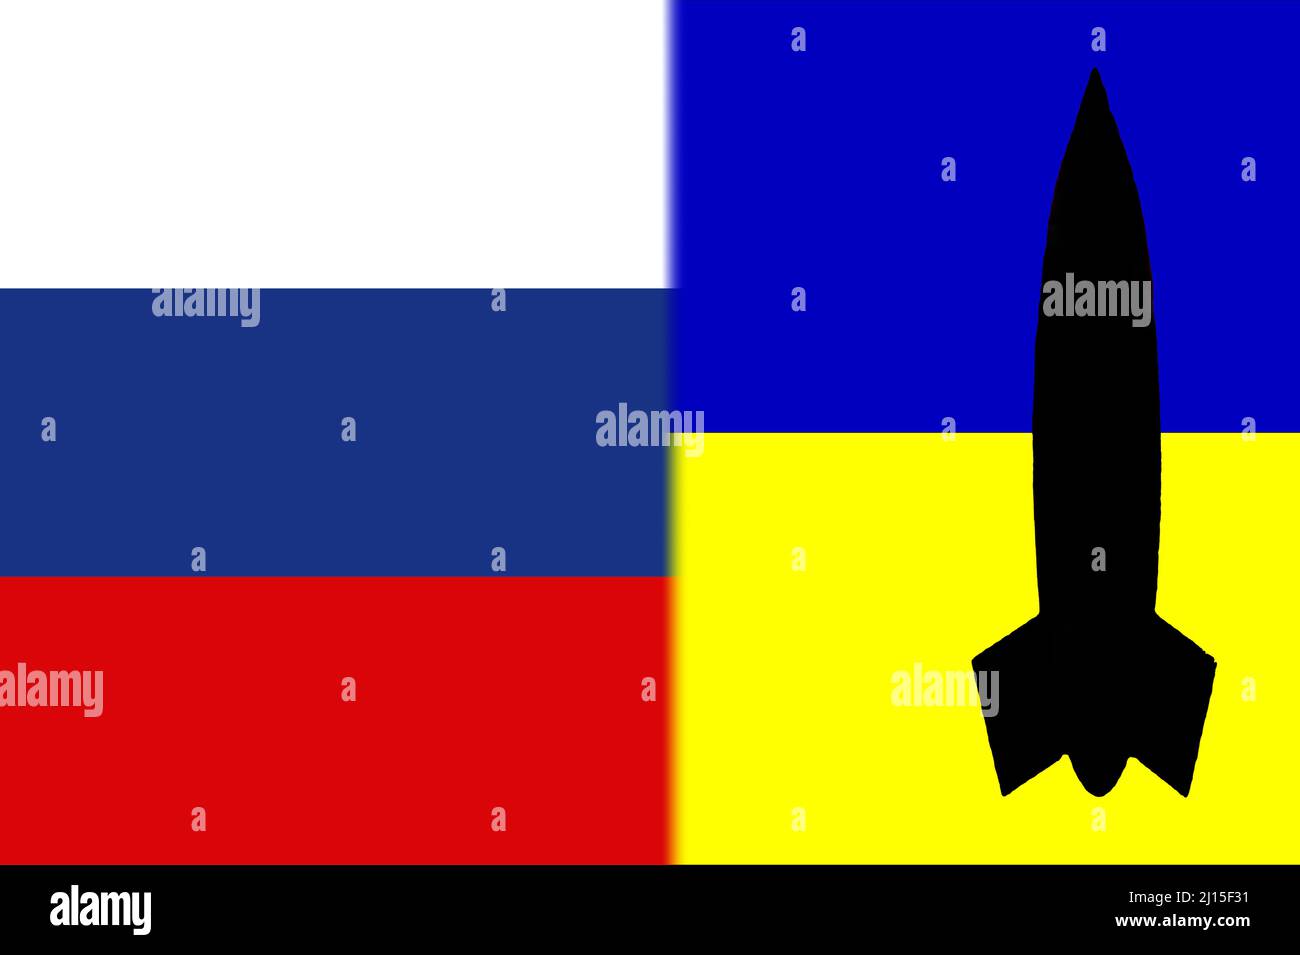 Ukraine Russia. Nuclear weapons. Russia flag and Ukrainian flag with nuclear weapons symbol with missile silhouette. Illustration of the flag Russia Stock Photo